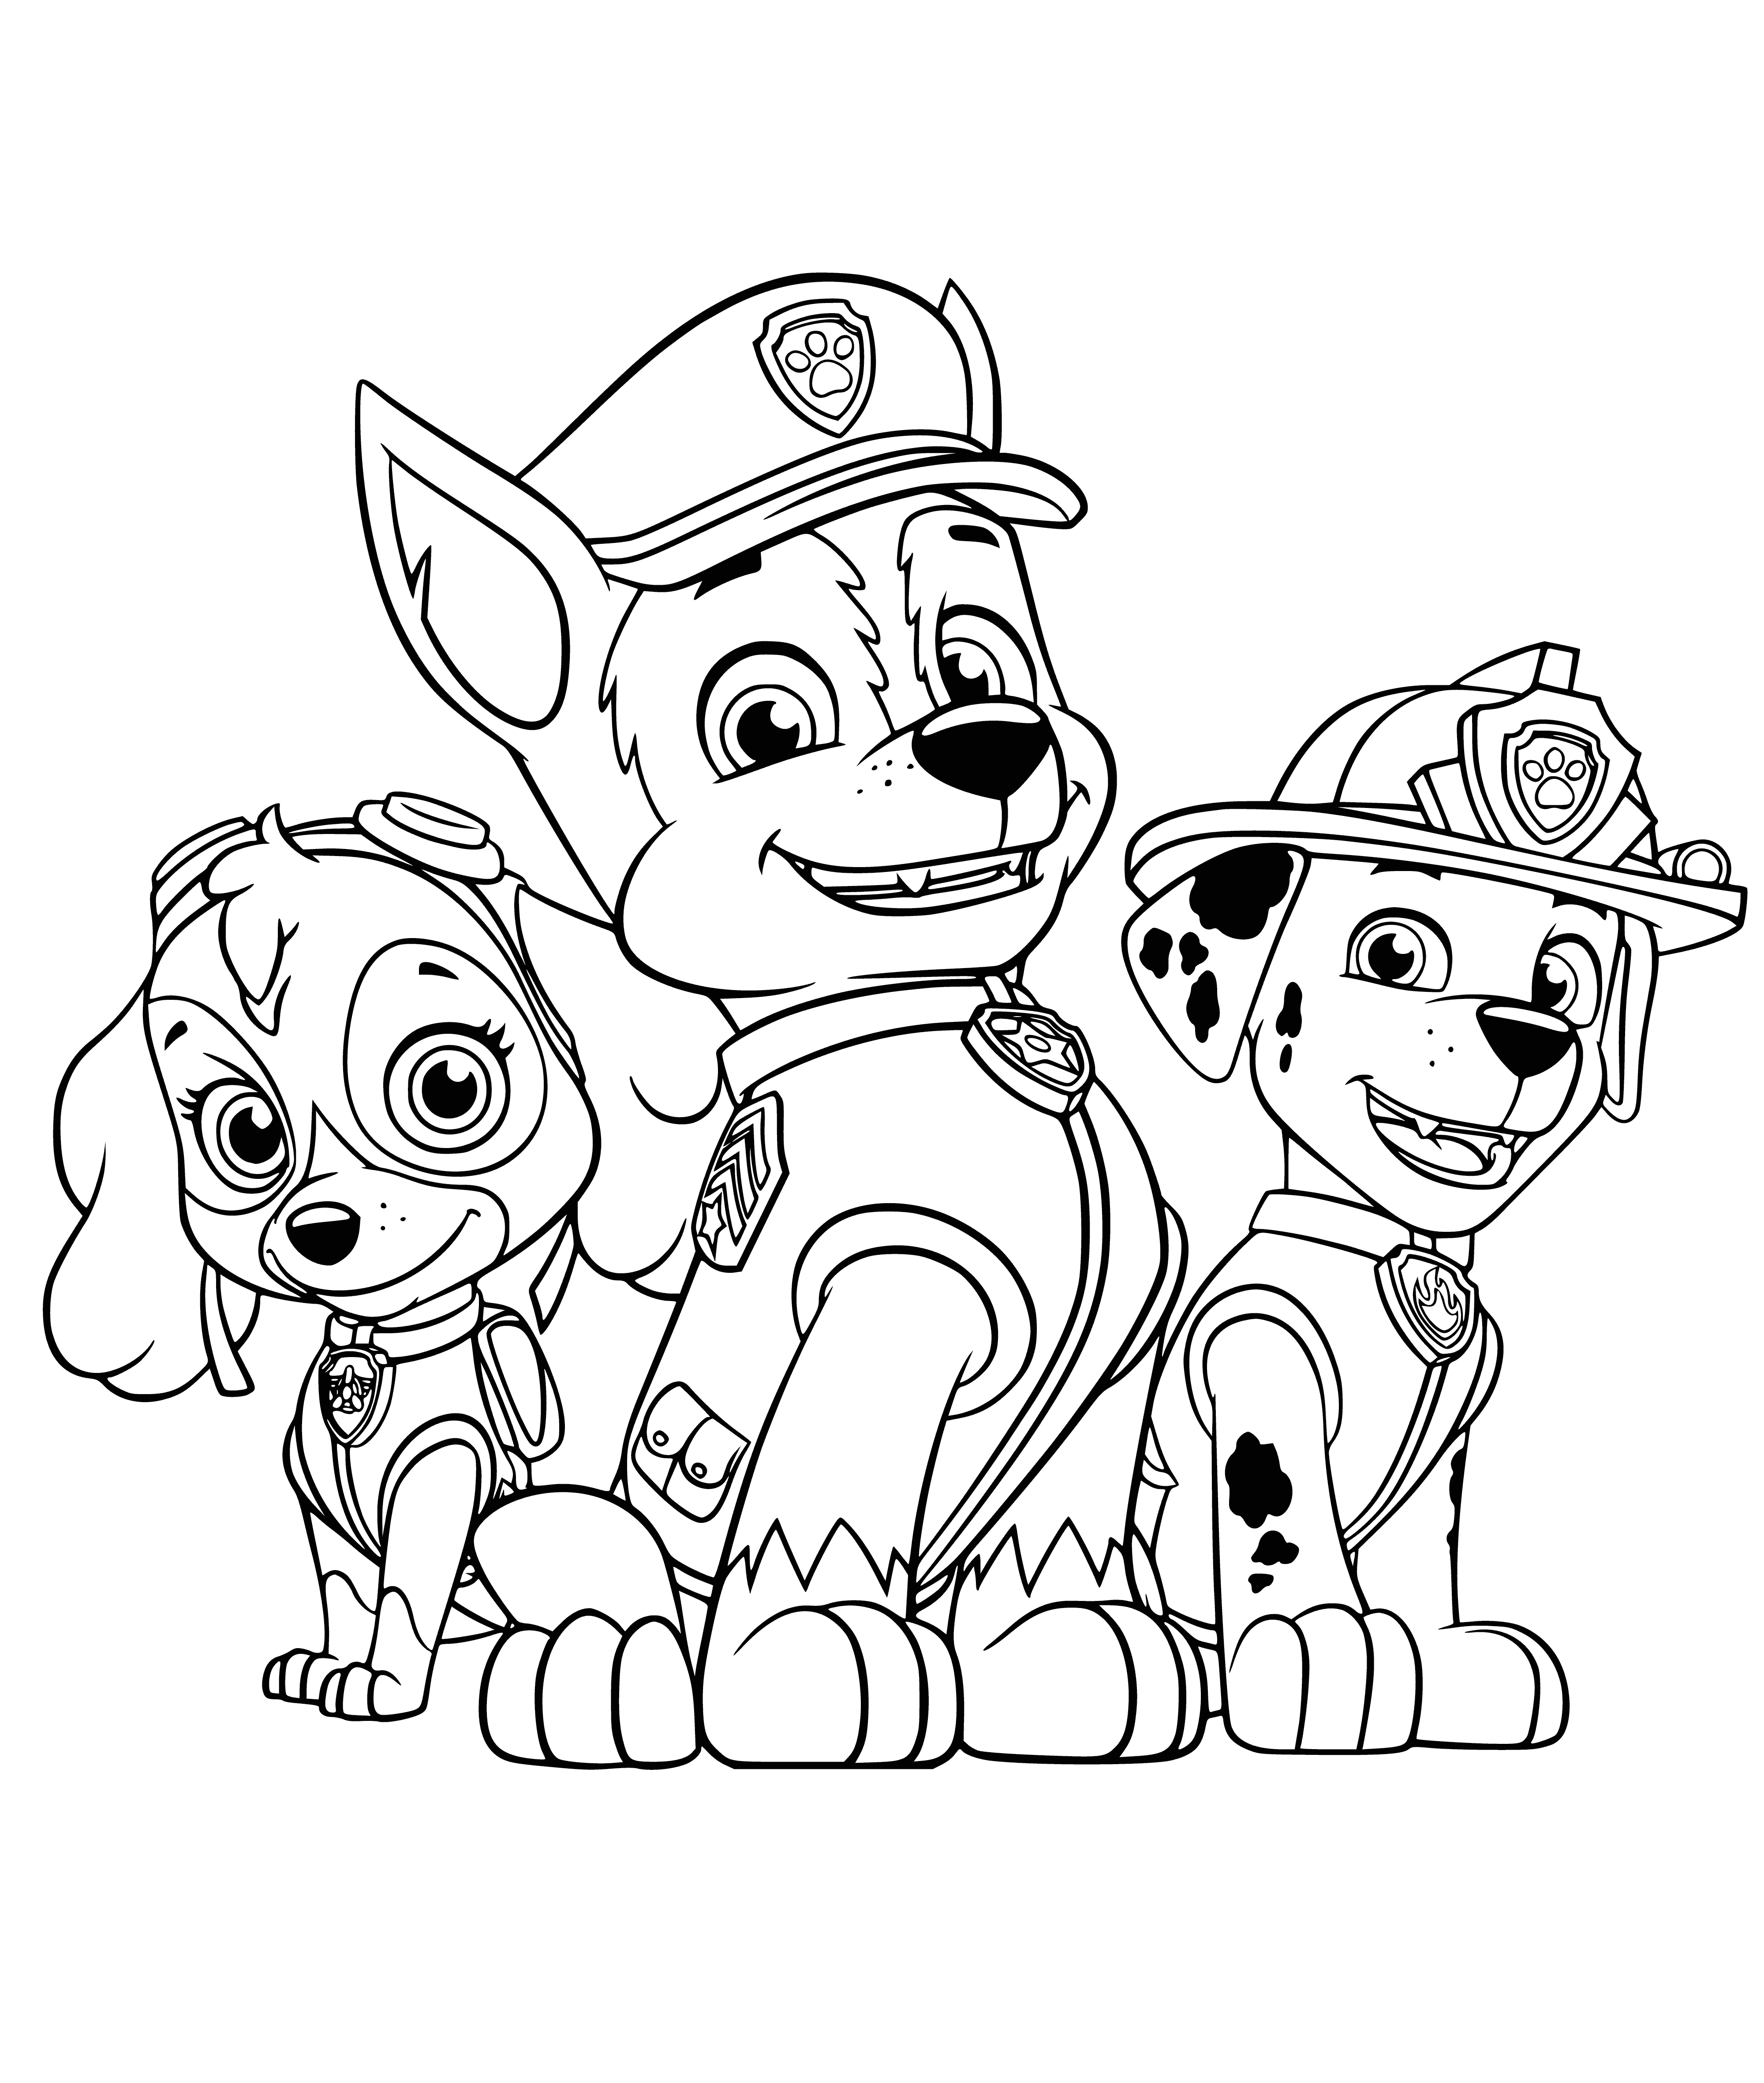 coloring page: Paw Patrol heroes ready to save the day with super-cool race cars, always ready for a high-speed chase! #PAWPatrol